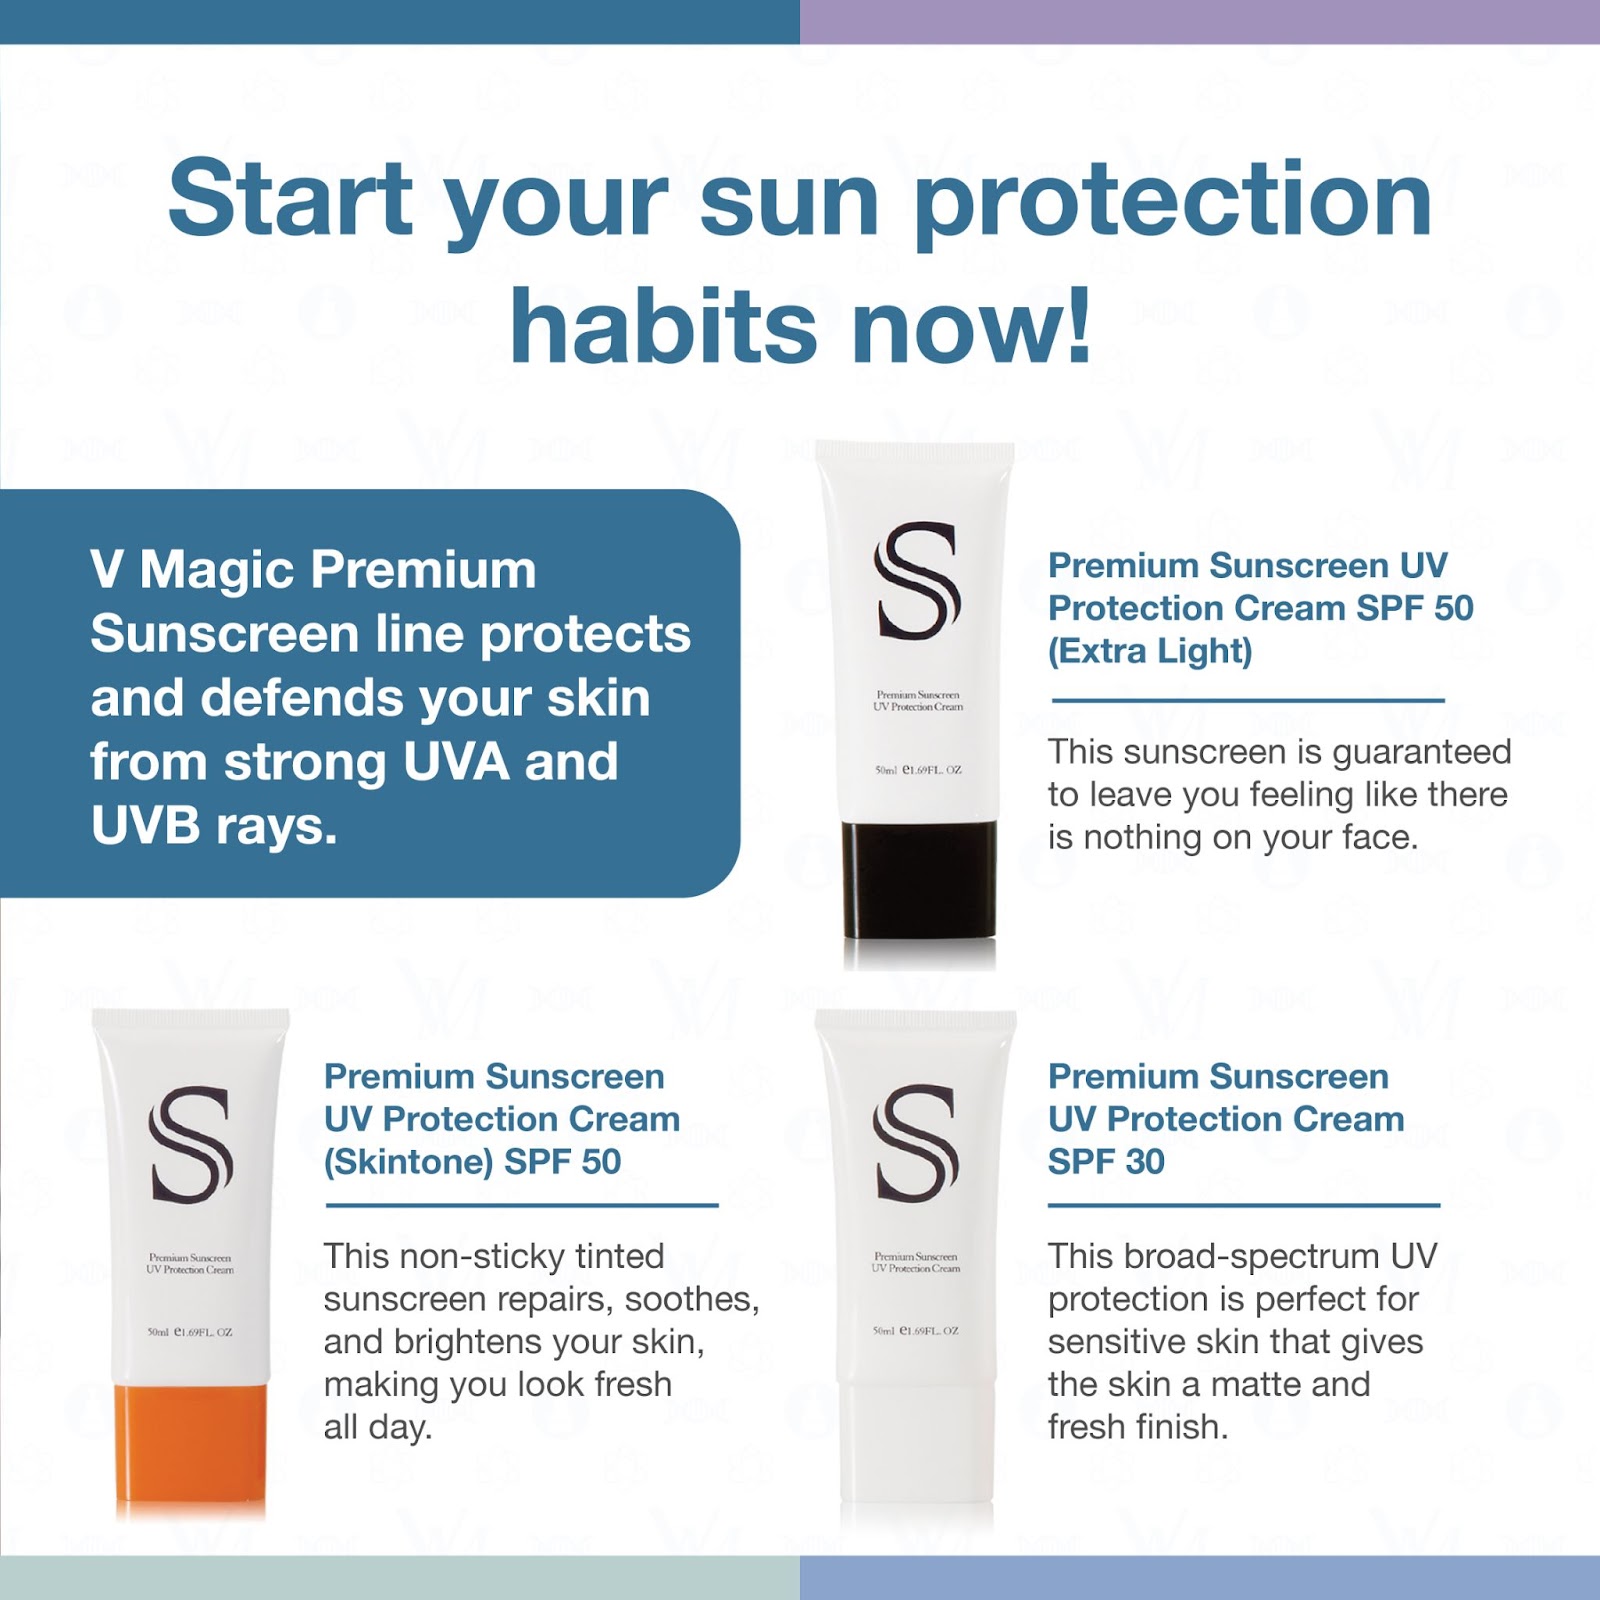 An image of V Magic’s different sunscreen products that protect and defend your skin from strong UVA and UVB rays to prevent wrinkles. 